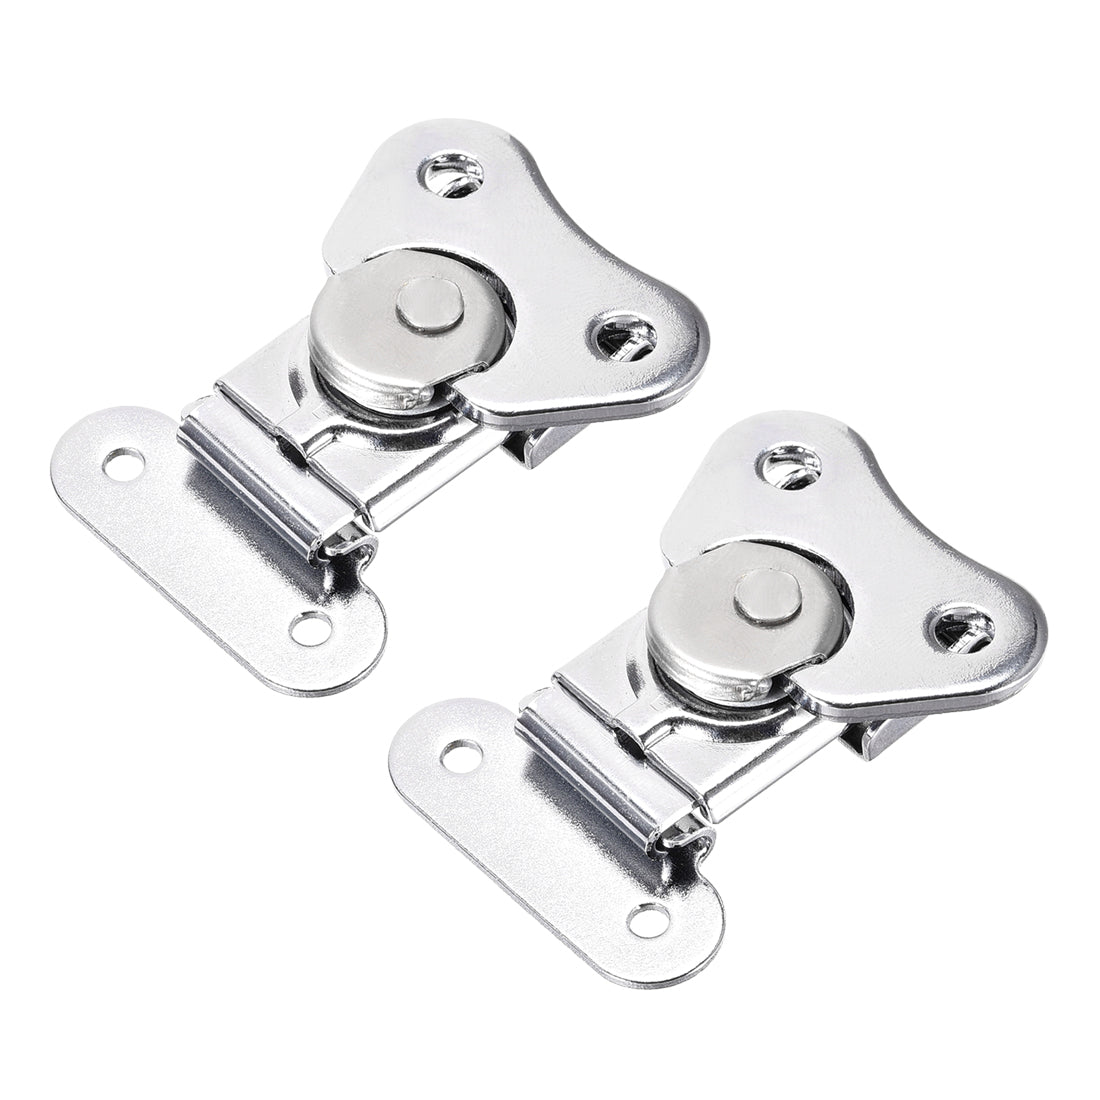 uxcell Uxcell 1.57-inch Iron Butterfly Twist Latch Keeper Toggle Clamp - 2 Pcs (Silver)